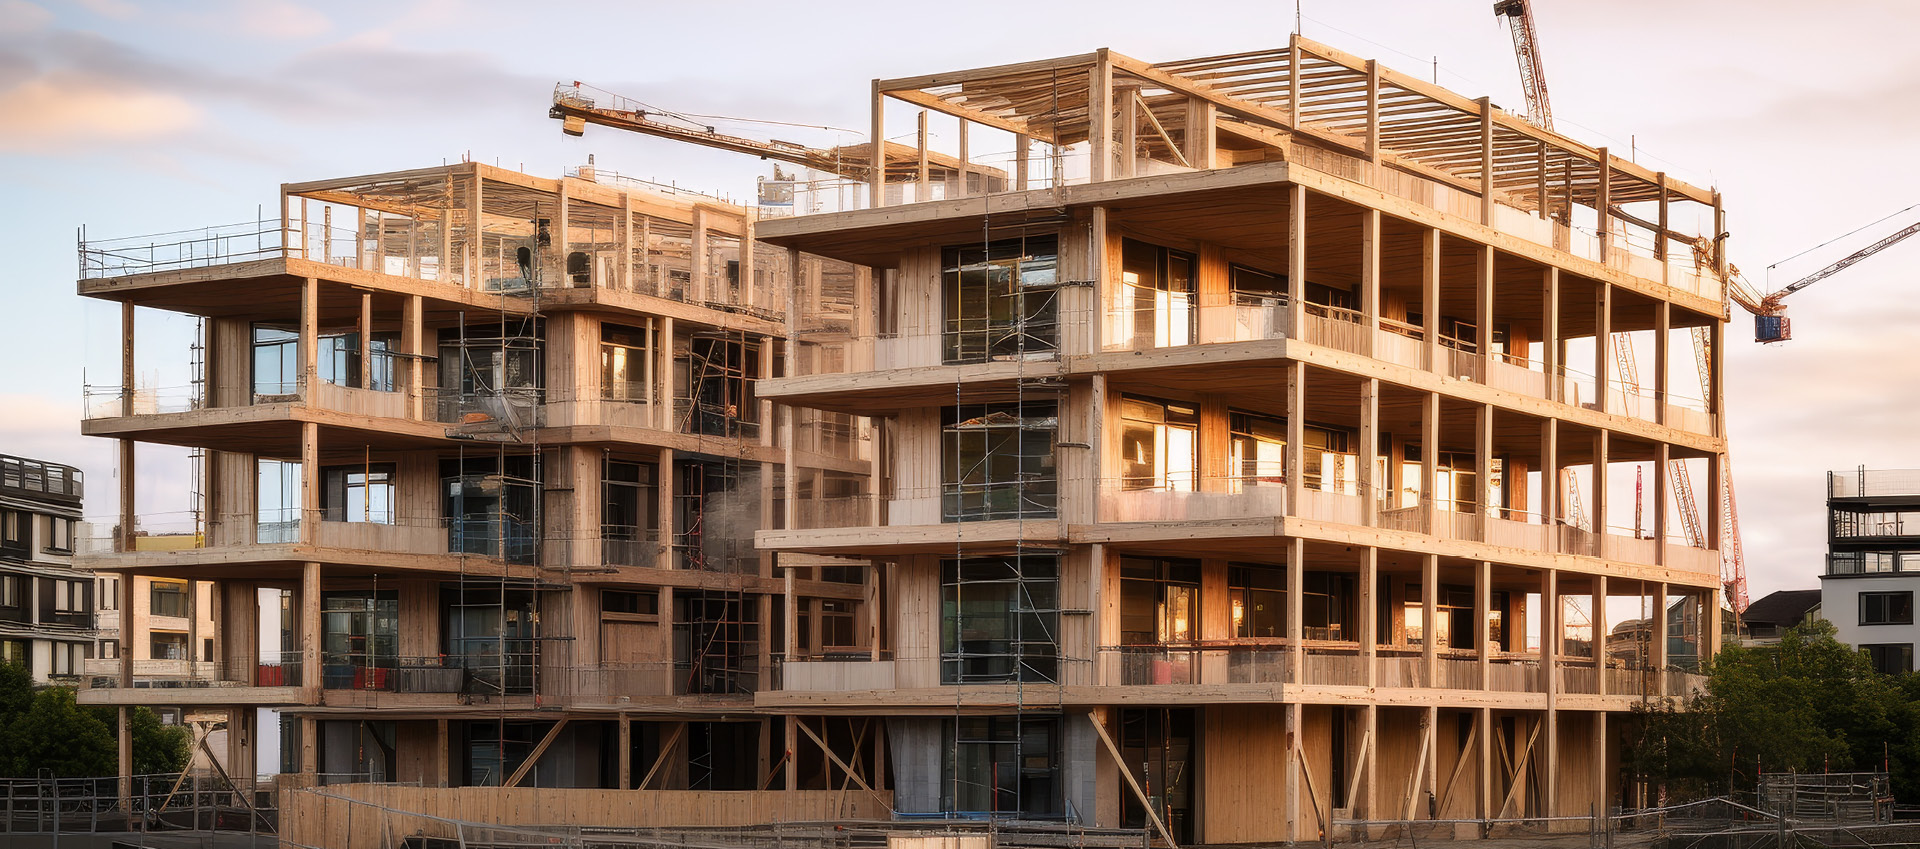 The role of CLT fastening technology in multi-storey timber construction